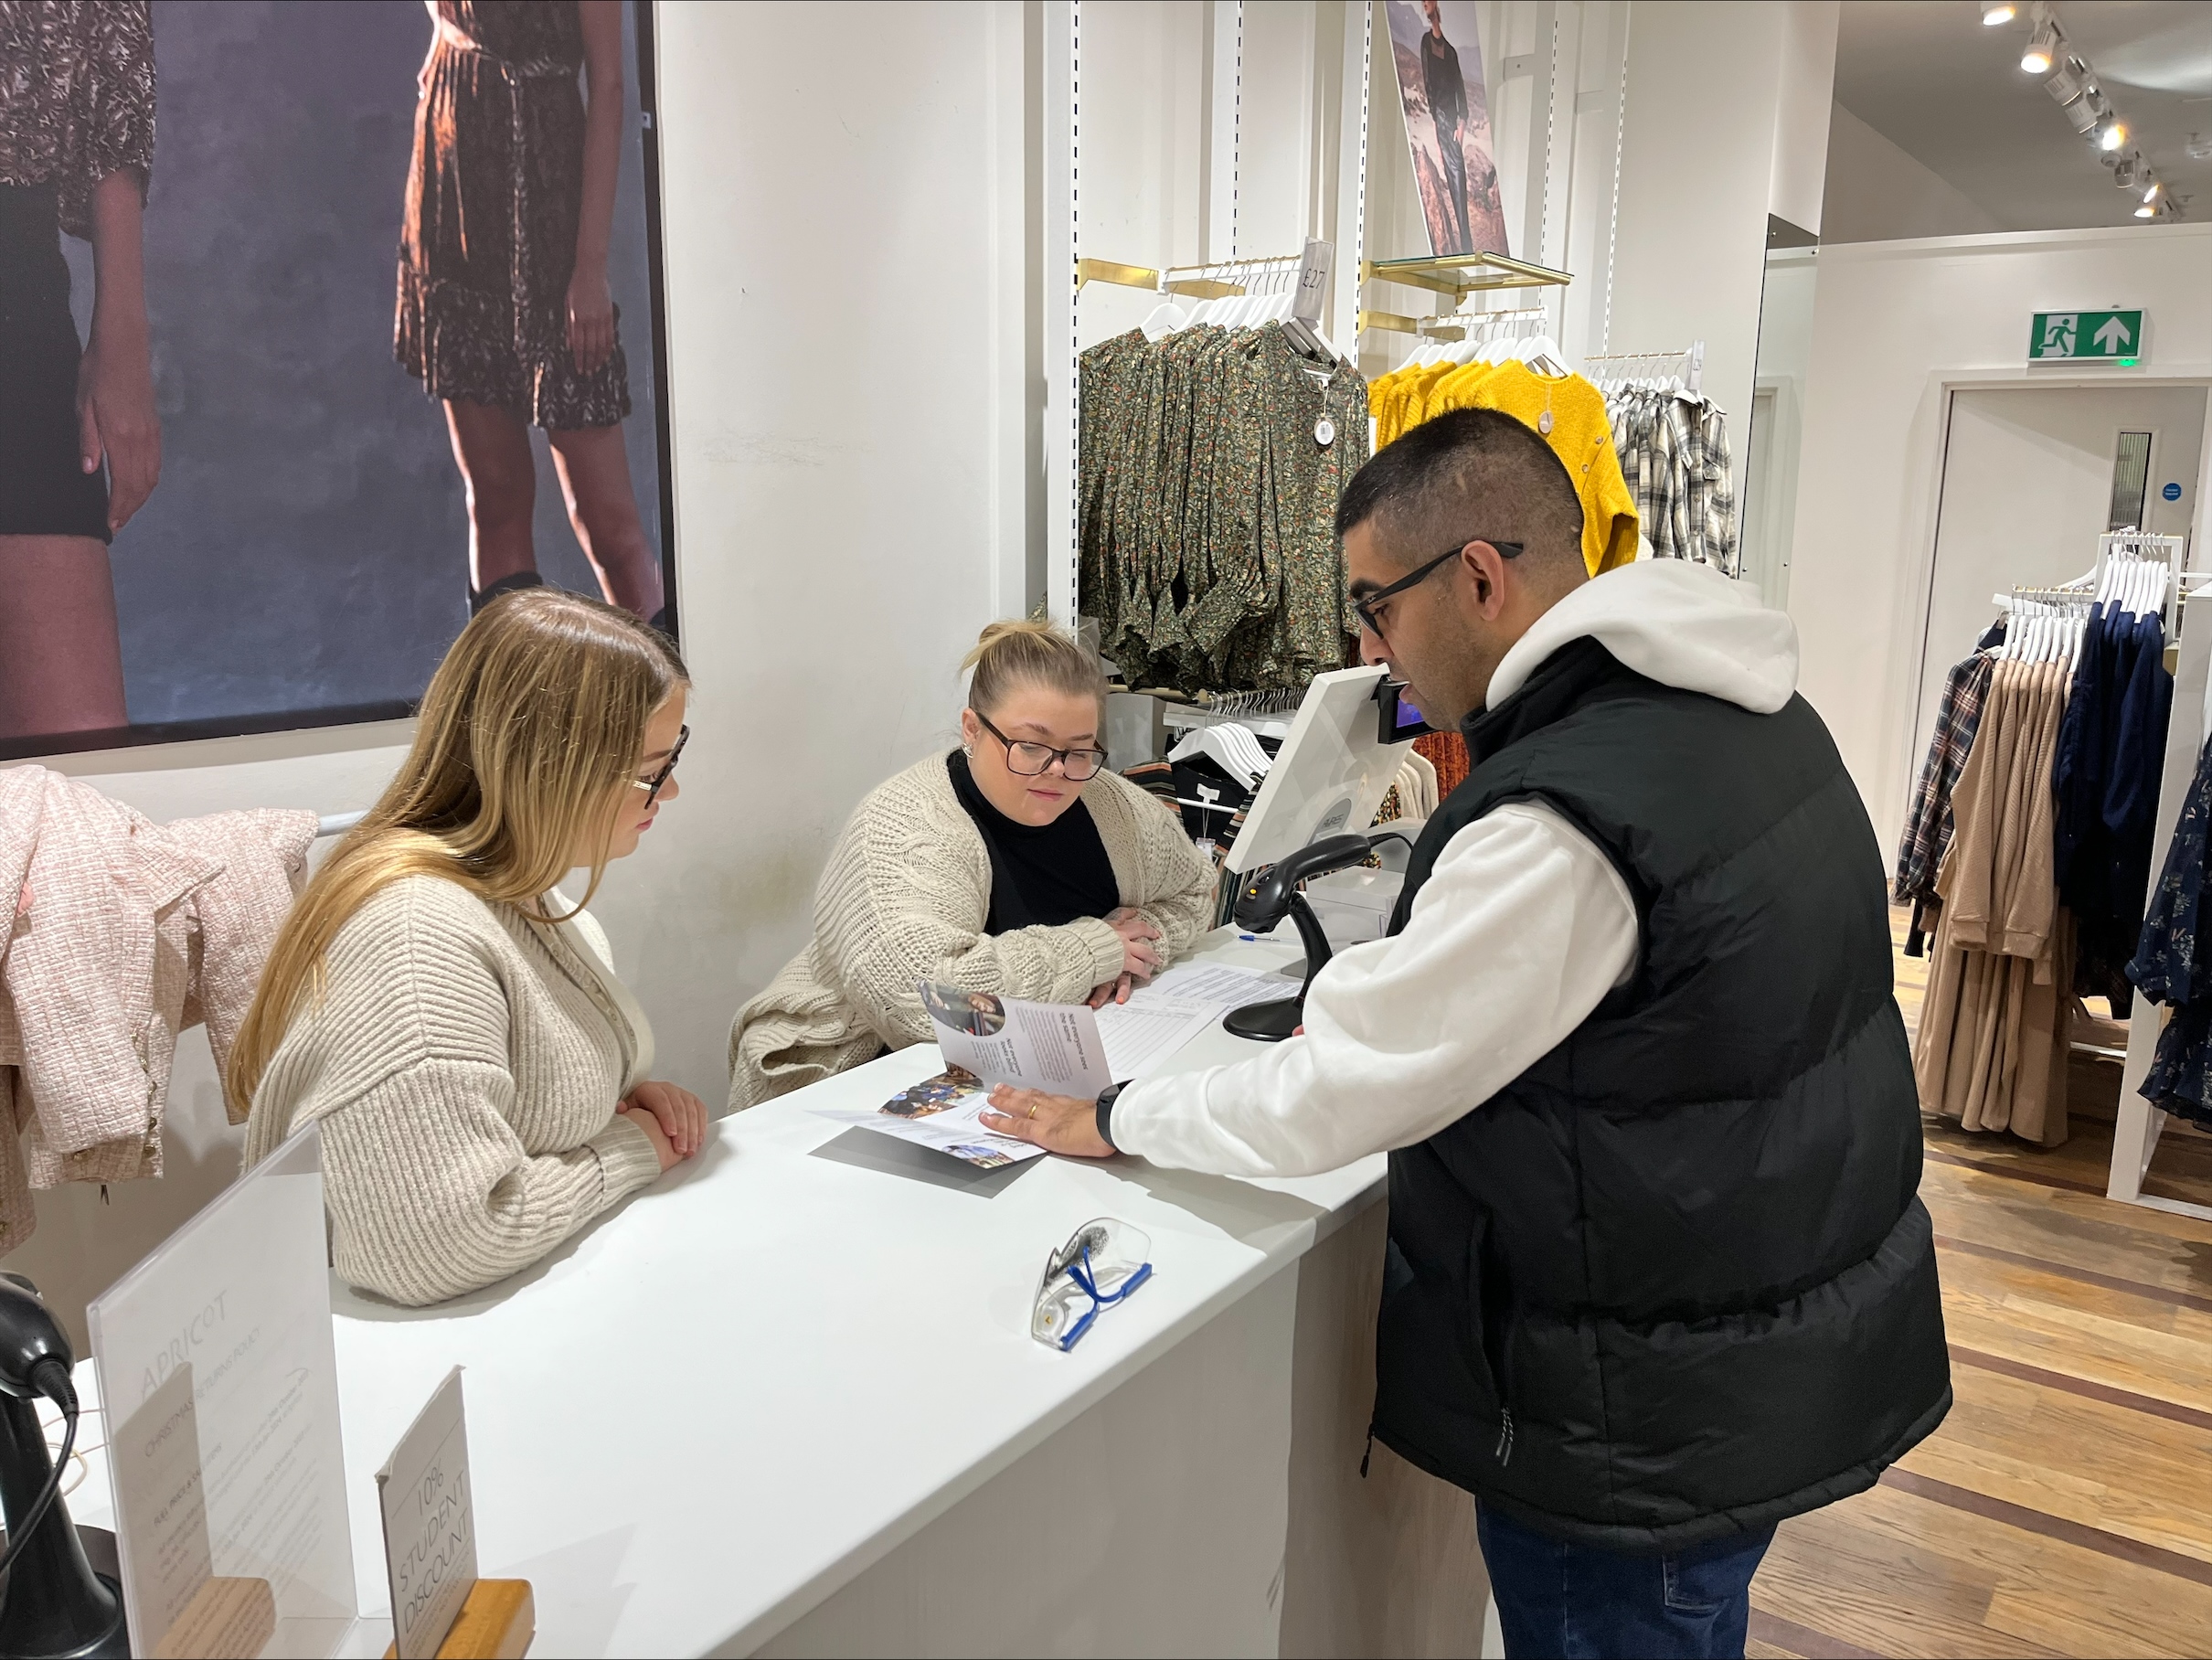 Jagdeep, Birmingham and Black Country SLC member, is standing at a counter in a clothing store, talking to two female retail assistants. He is showing them our Top Tips for Retail resource.